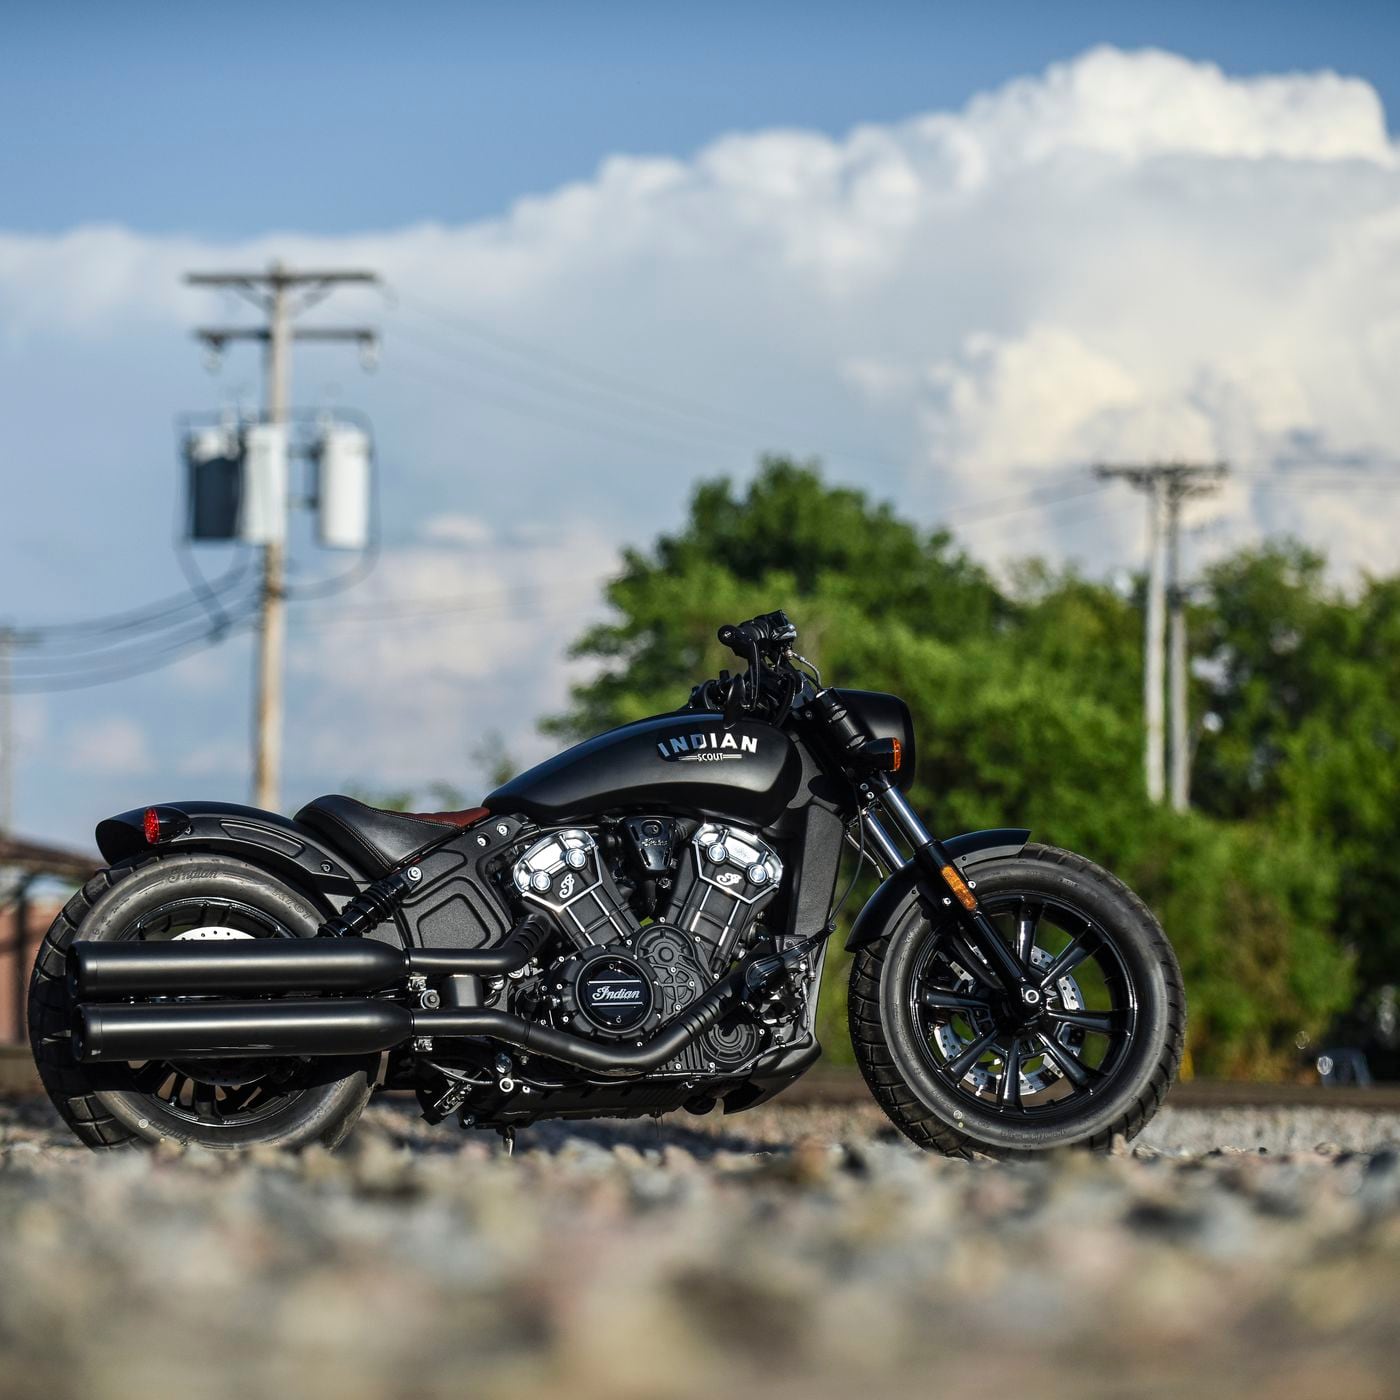 2018 Indian Scout Bobber: First Ride